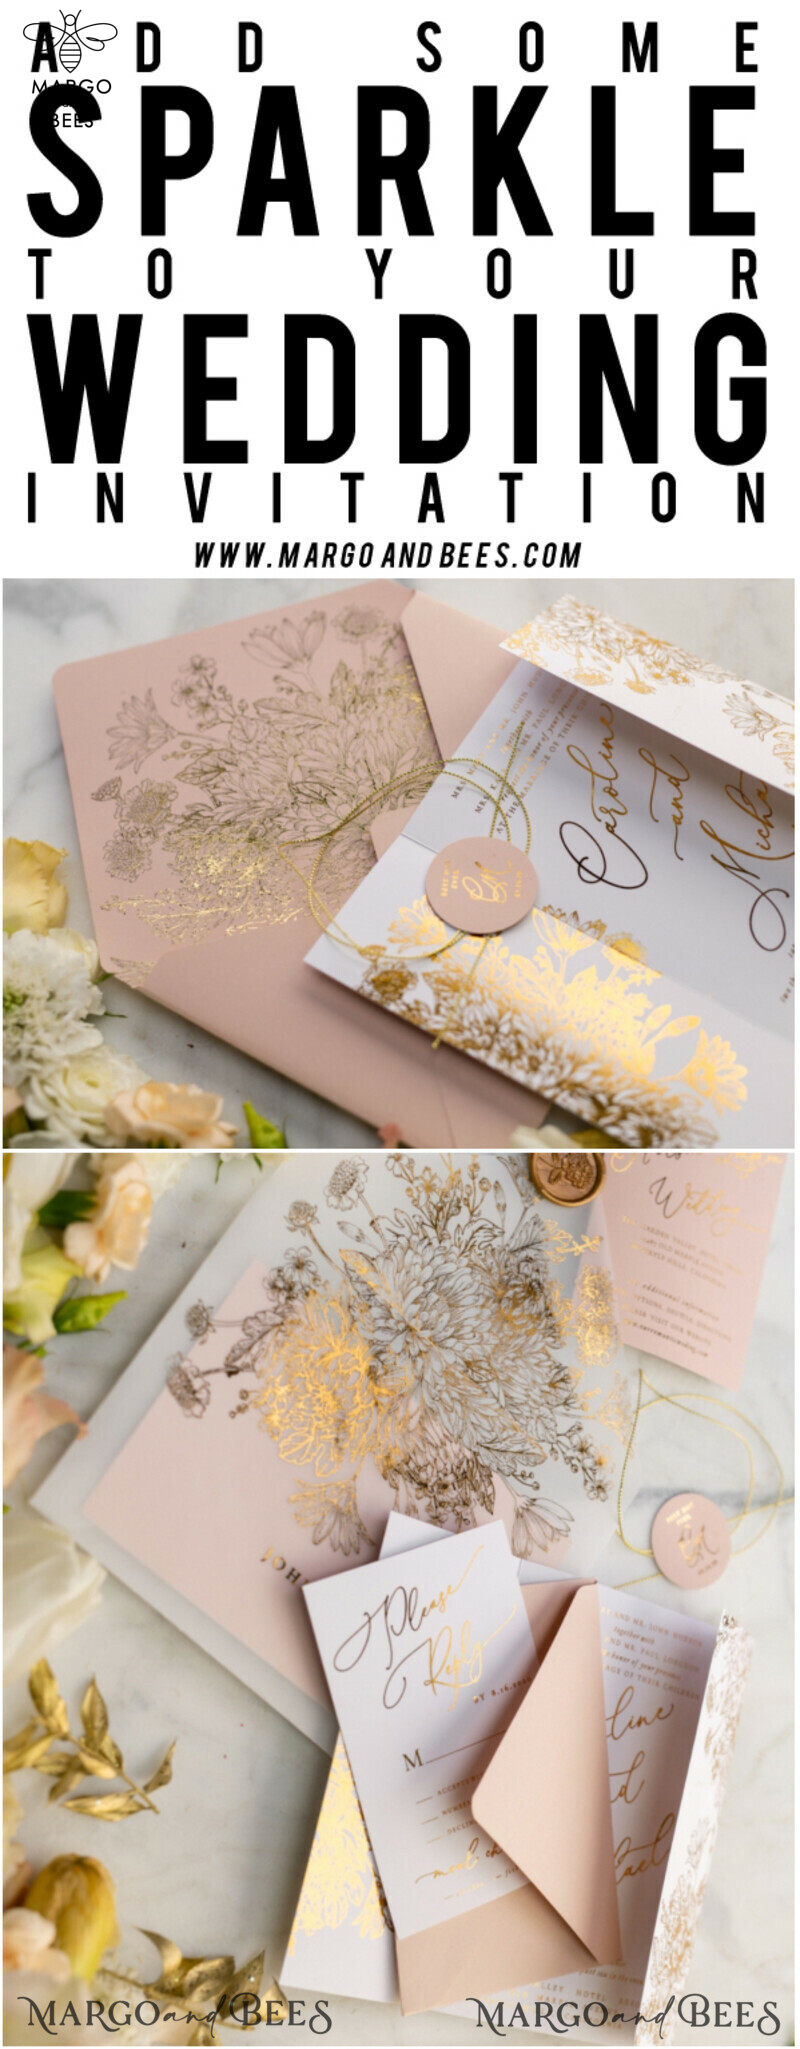 Exquisite Arabic Golden Wedding Invitations with Glamour Gold Foil for a Romantic Blush Pink Affair: Bespoke Indian Wedding Stationery-41